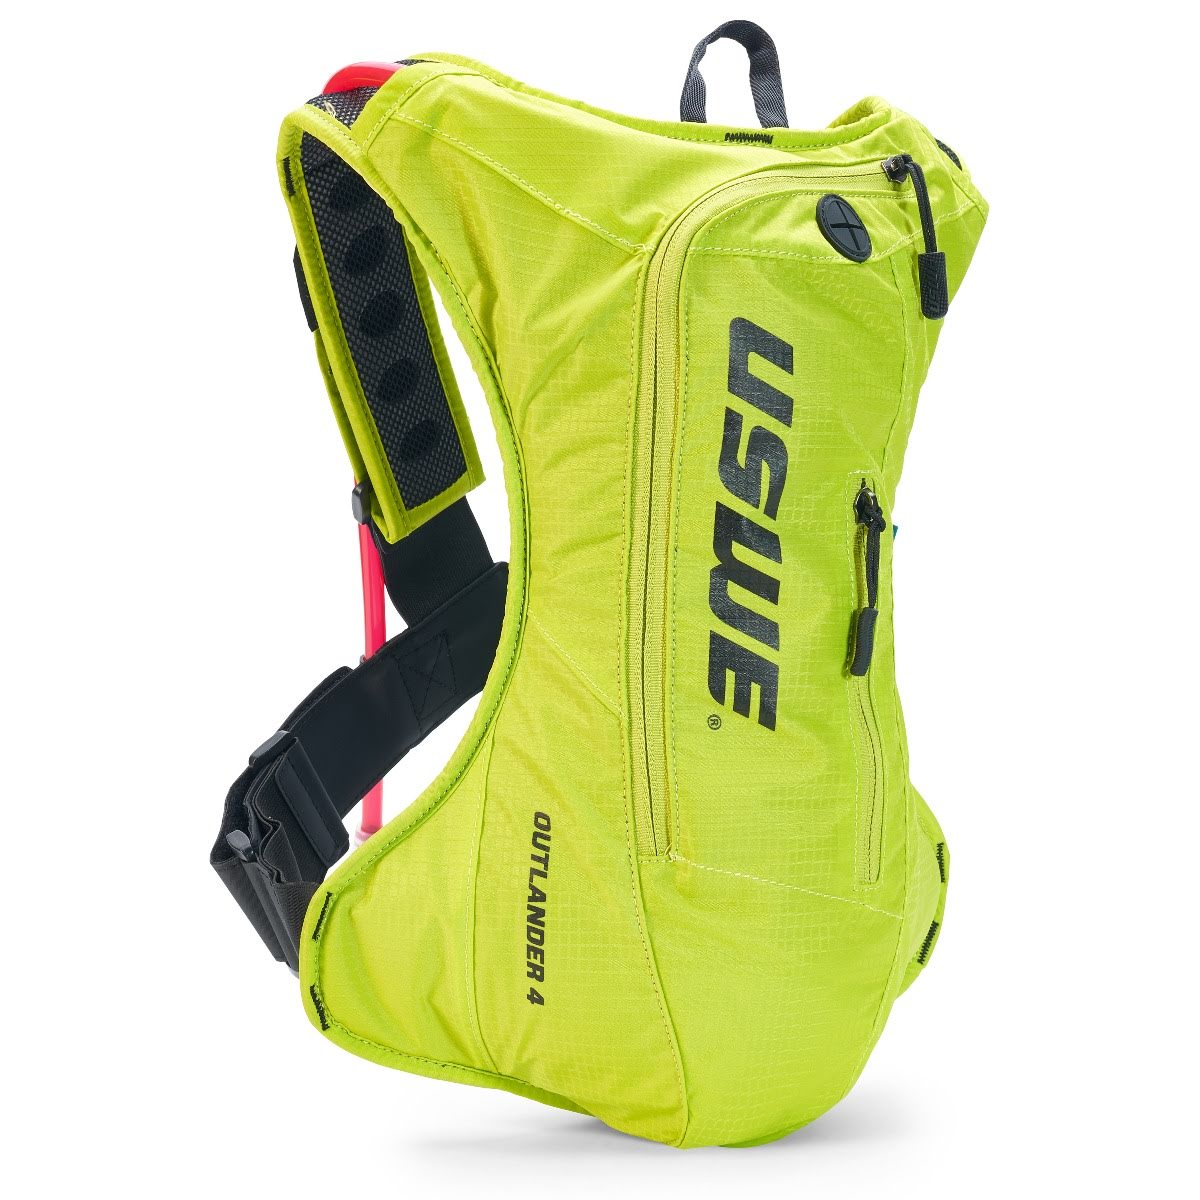 USWE Outlander 4 Hydration Backpack Crazy Yellow – With 3 Litre Bladder